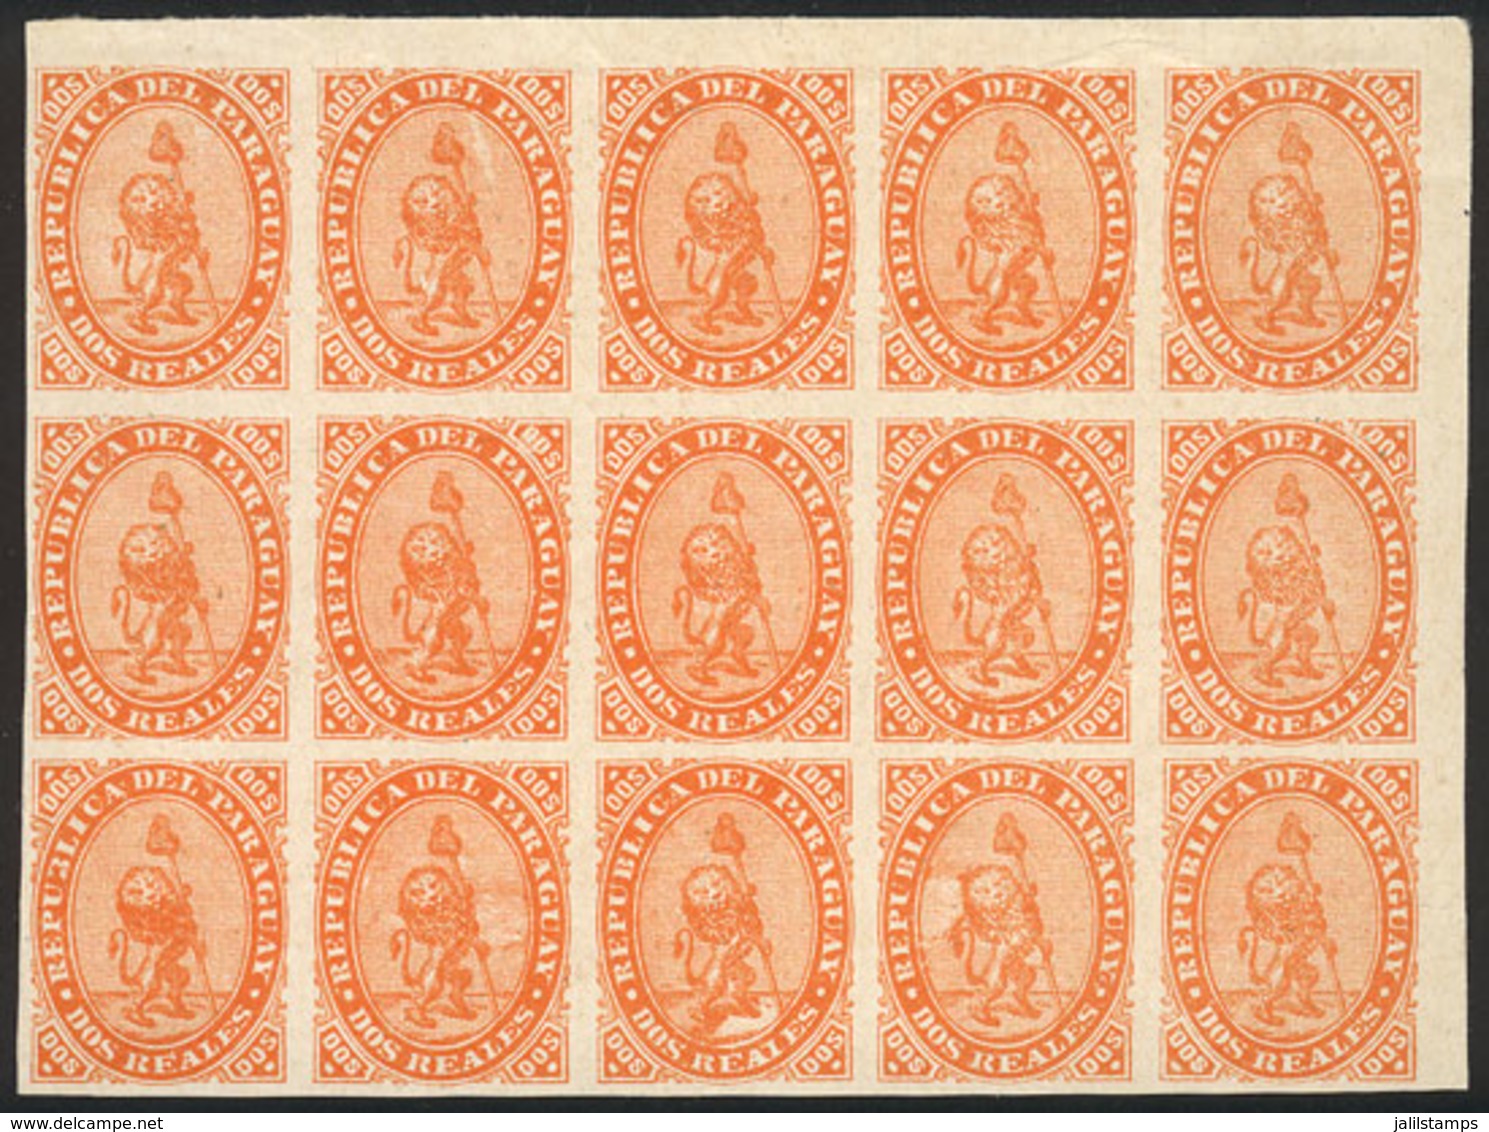 PARAGUAY: Sc.2, 1870 Lion 2R., PROOF In Orange, Block Of 15 Stamps Printed On Thick Paper Glazed On Both Sides, To - Paraguay